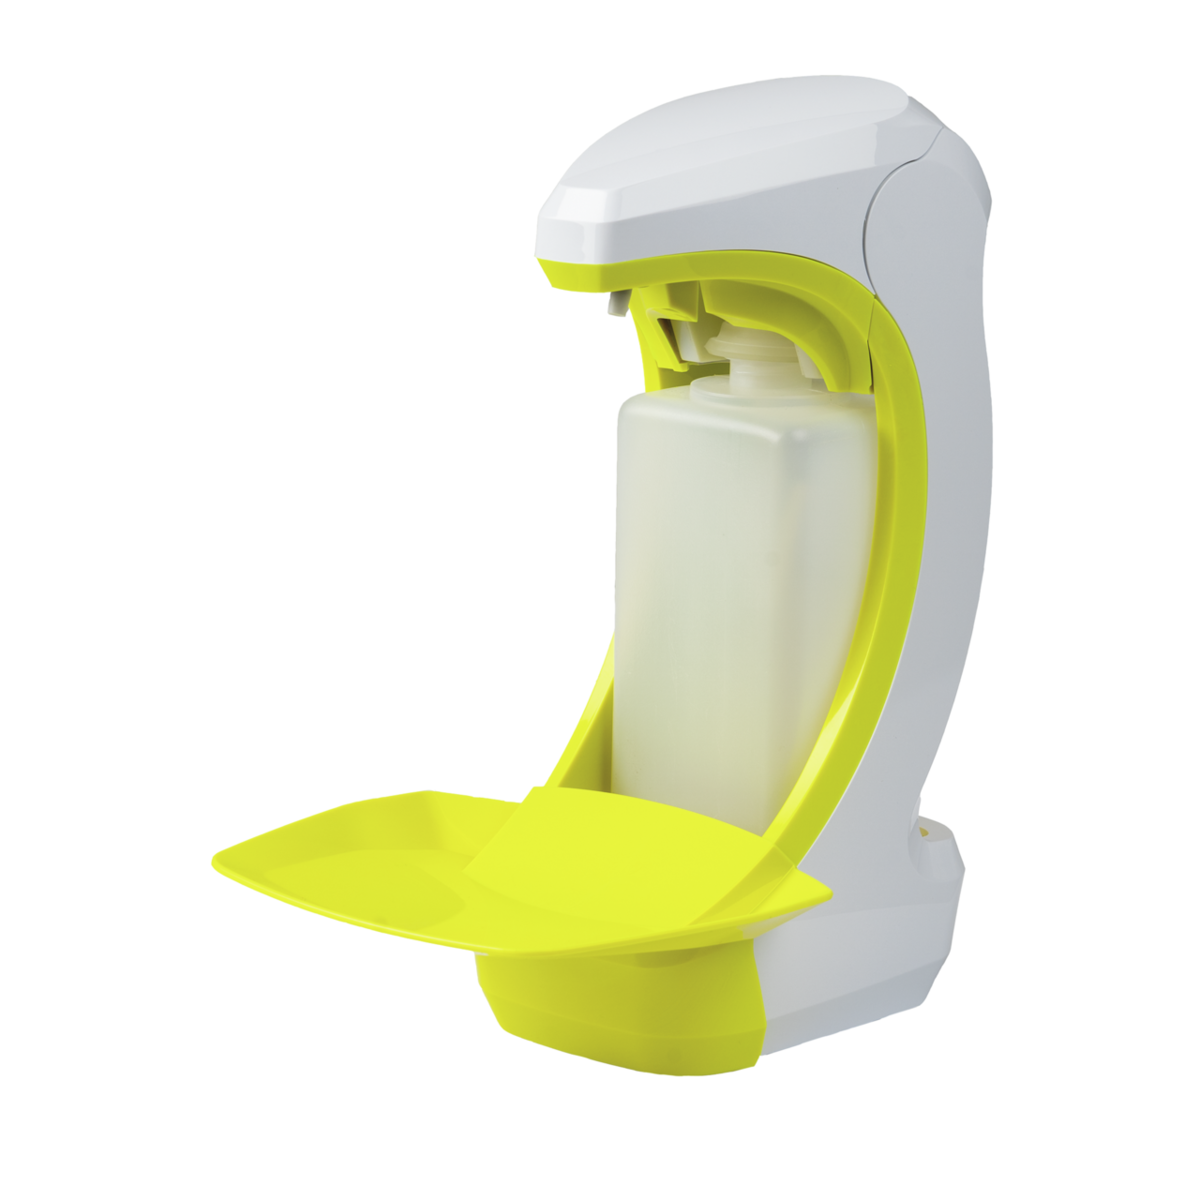 RX 5 T hi-vis yellow (1,0 ml) with yellow drip tray